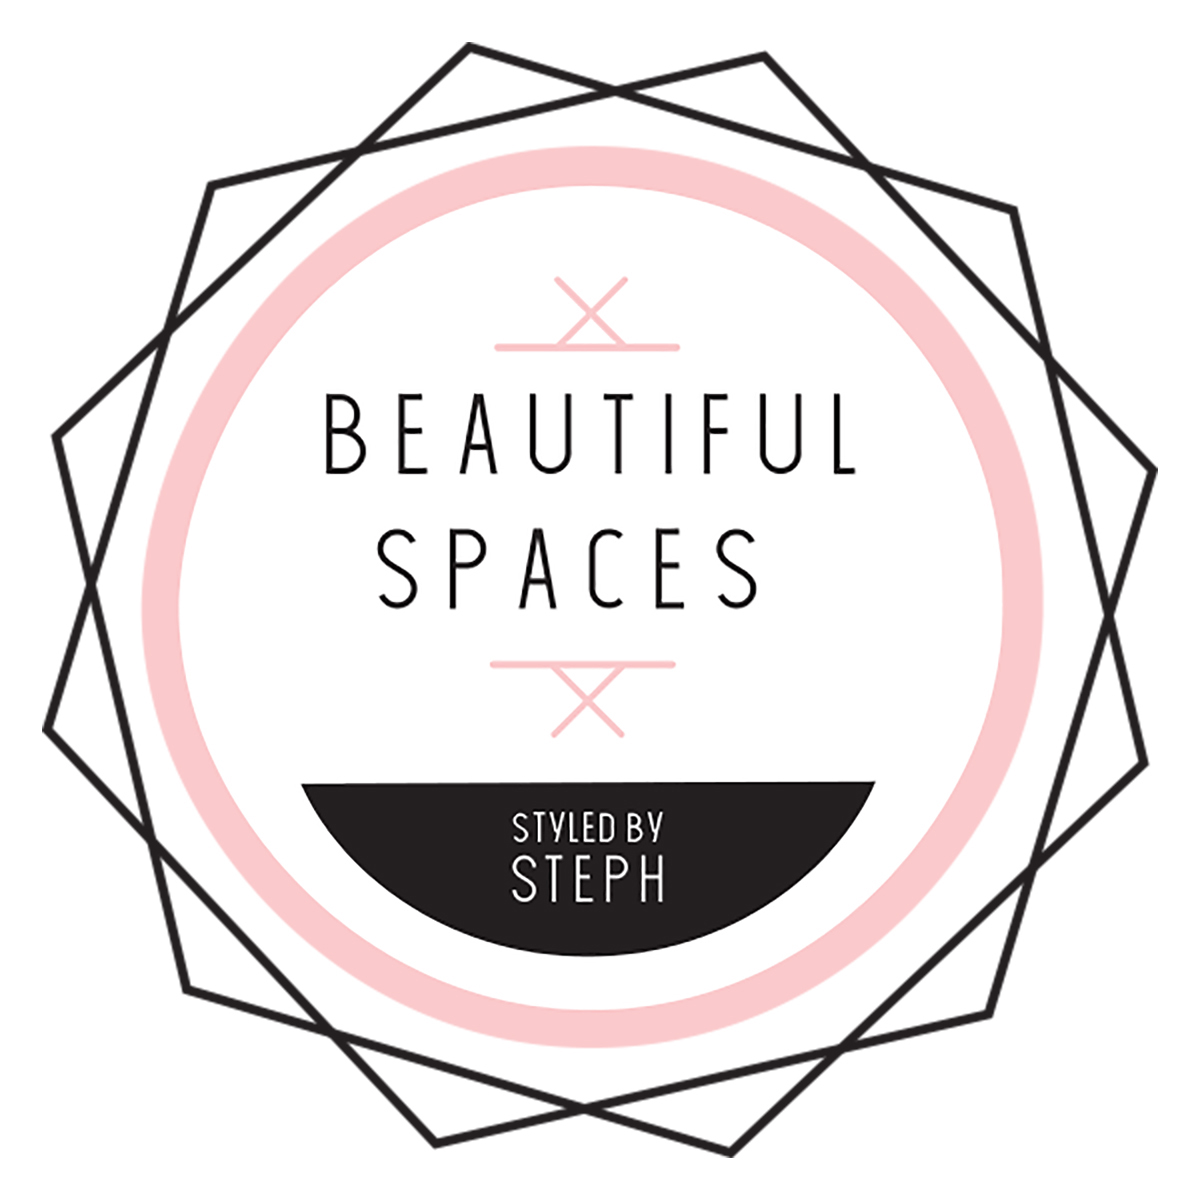 Beautiful Spaces Styled by Steph